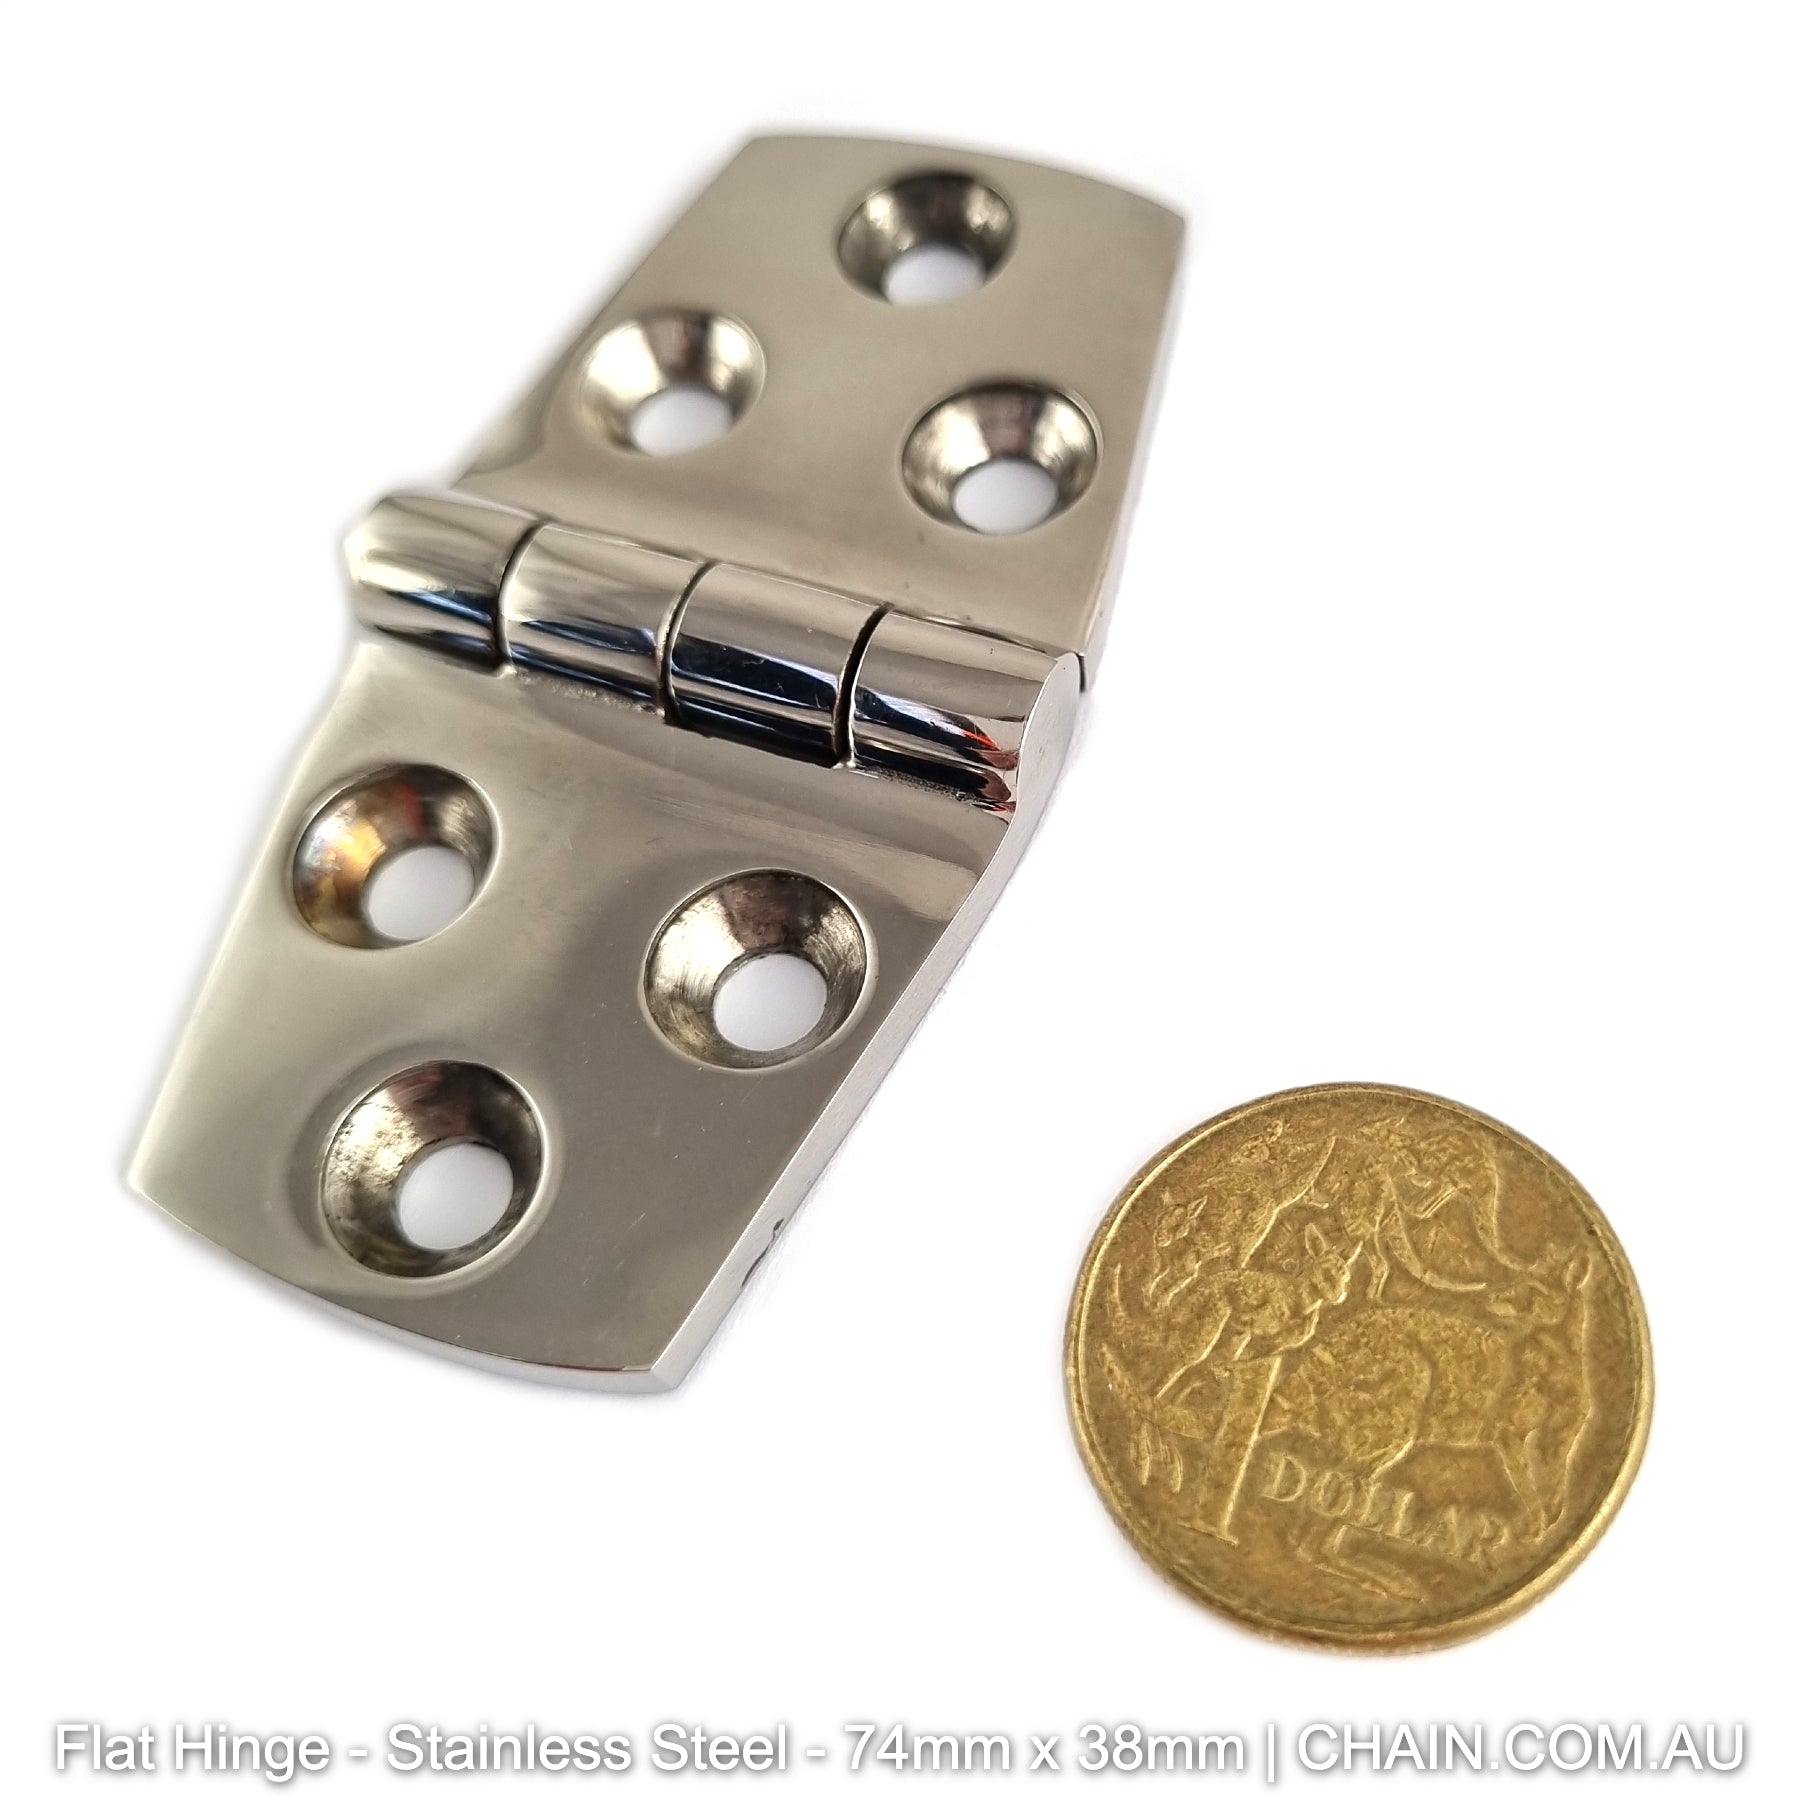 Stainless Steel Flat Hinge. Size: 74mm x 38mm. Shop online chain.com.au. Shipping Australia wide.